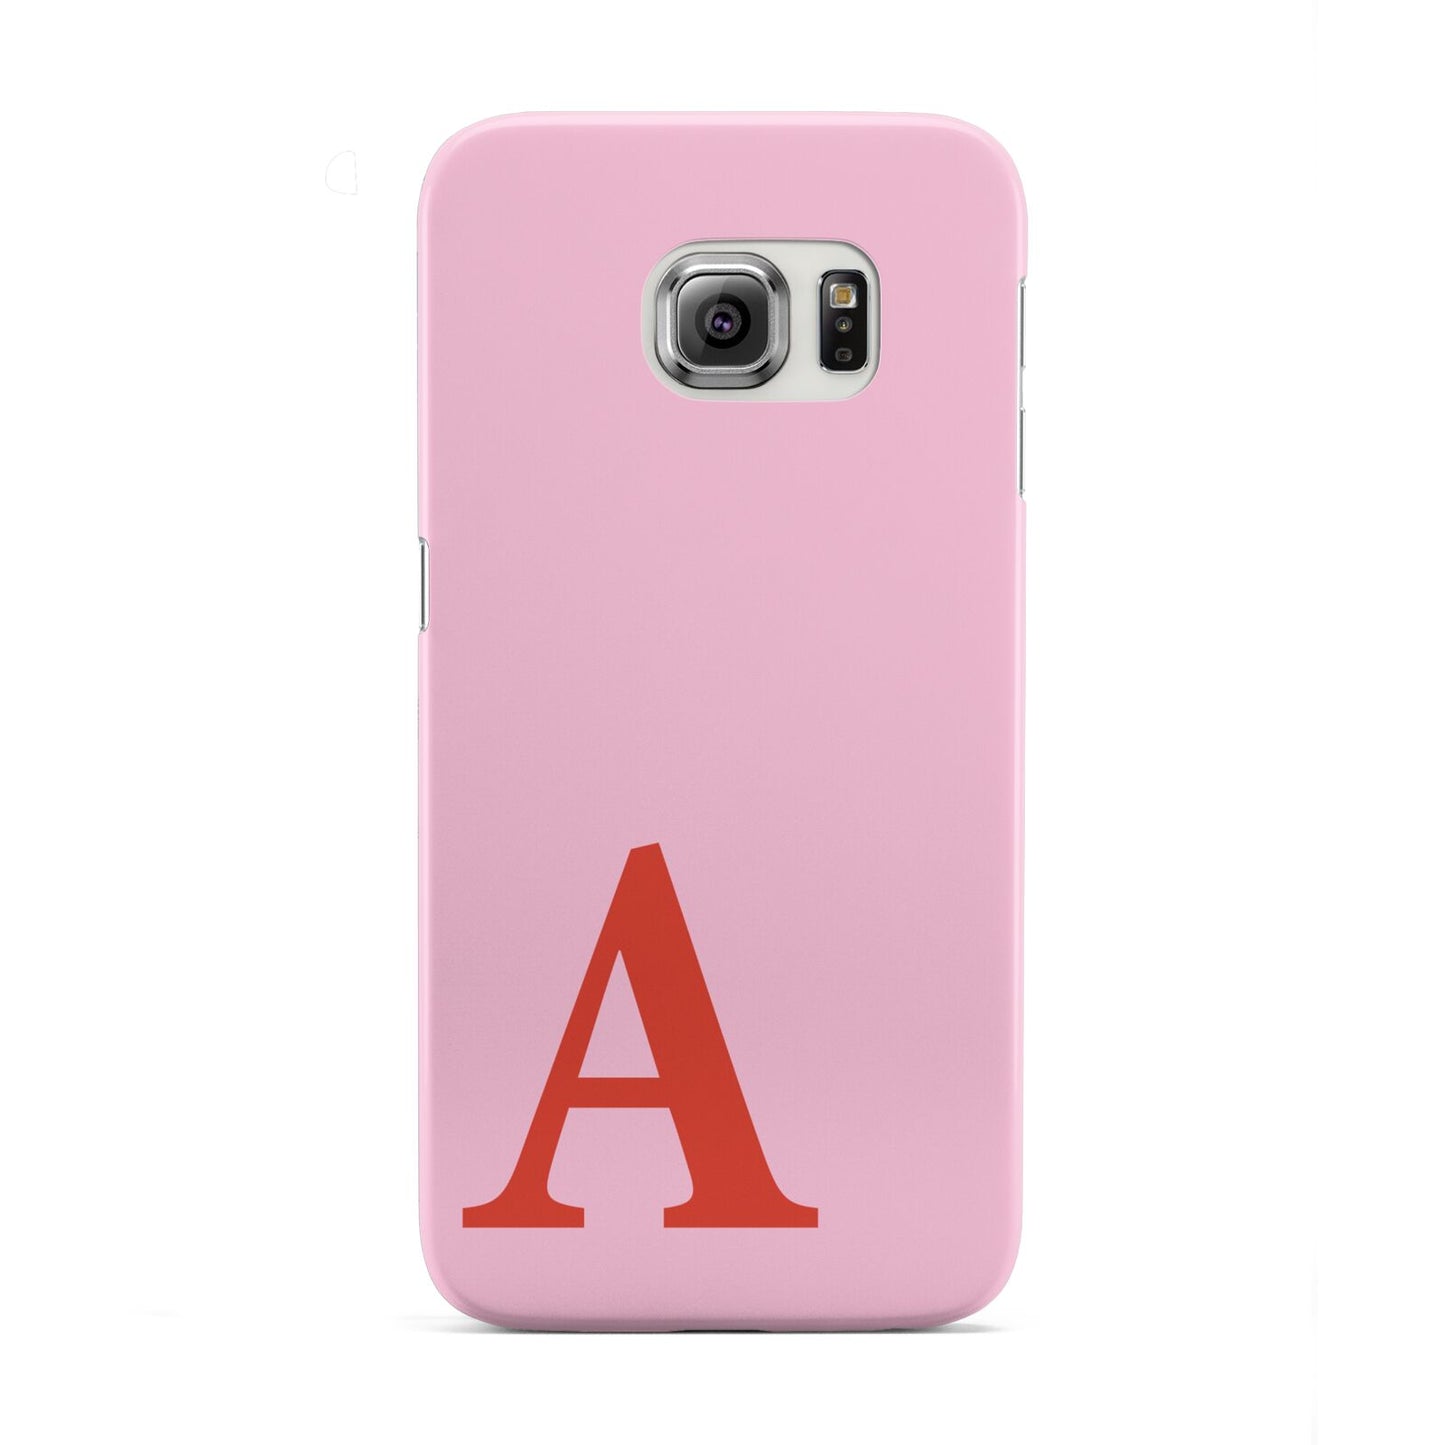 Personalised Pink and Red Samsung Galaxy S6 Edge Case